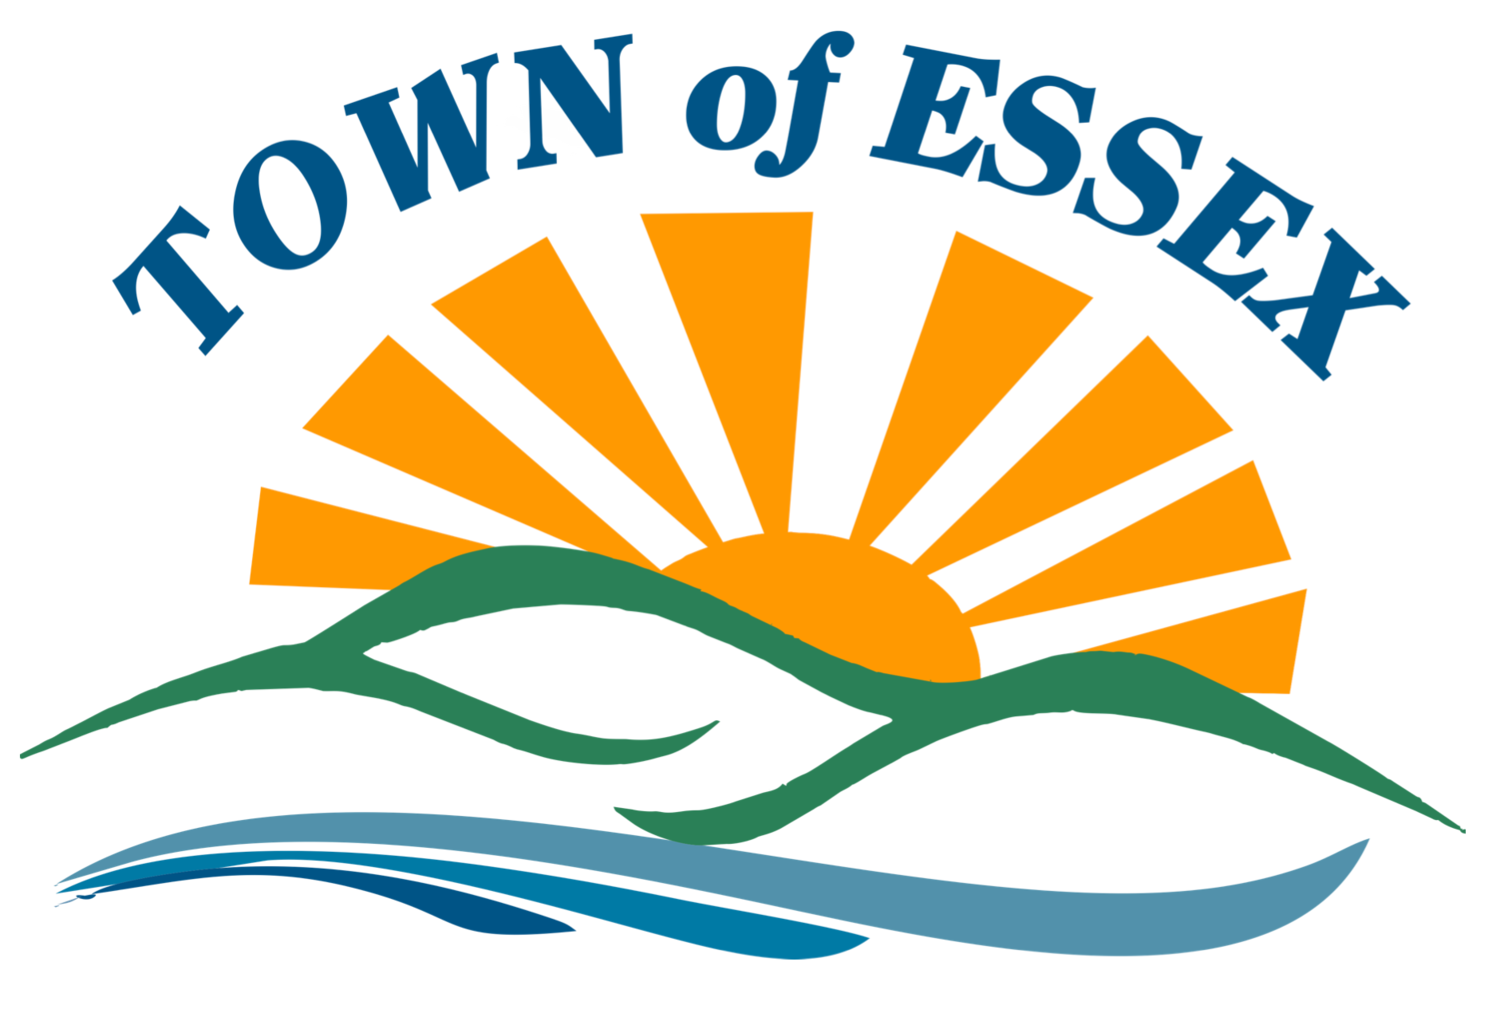 Town of Essex